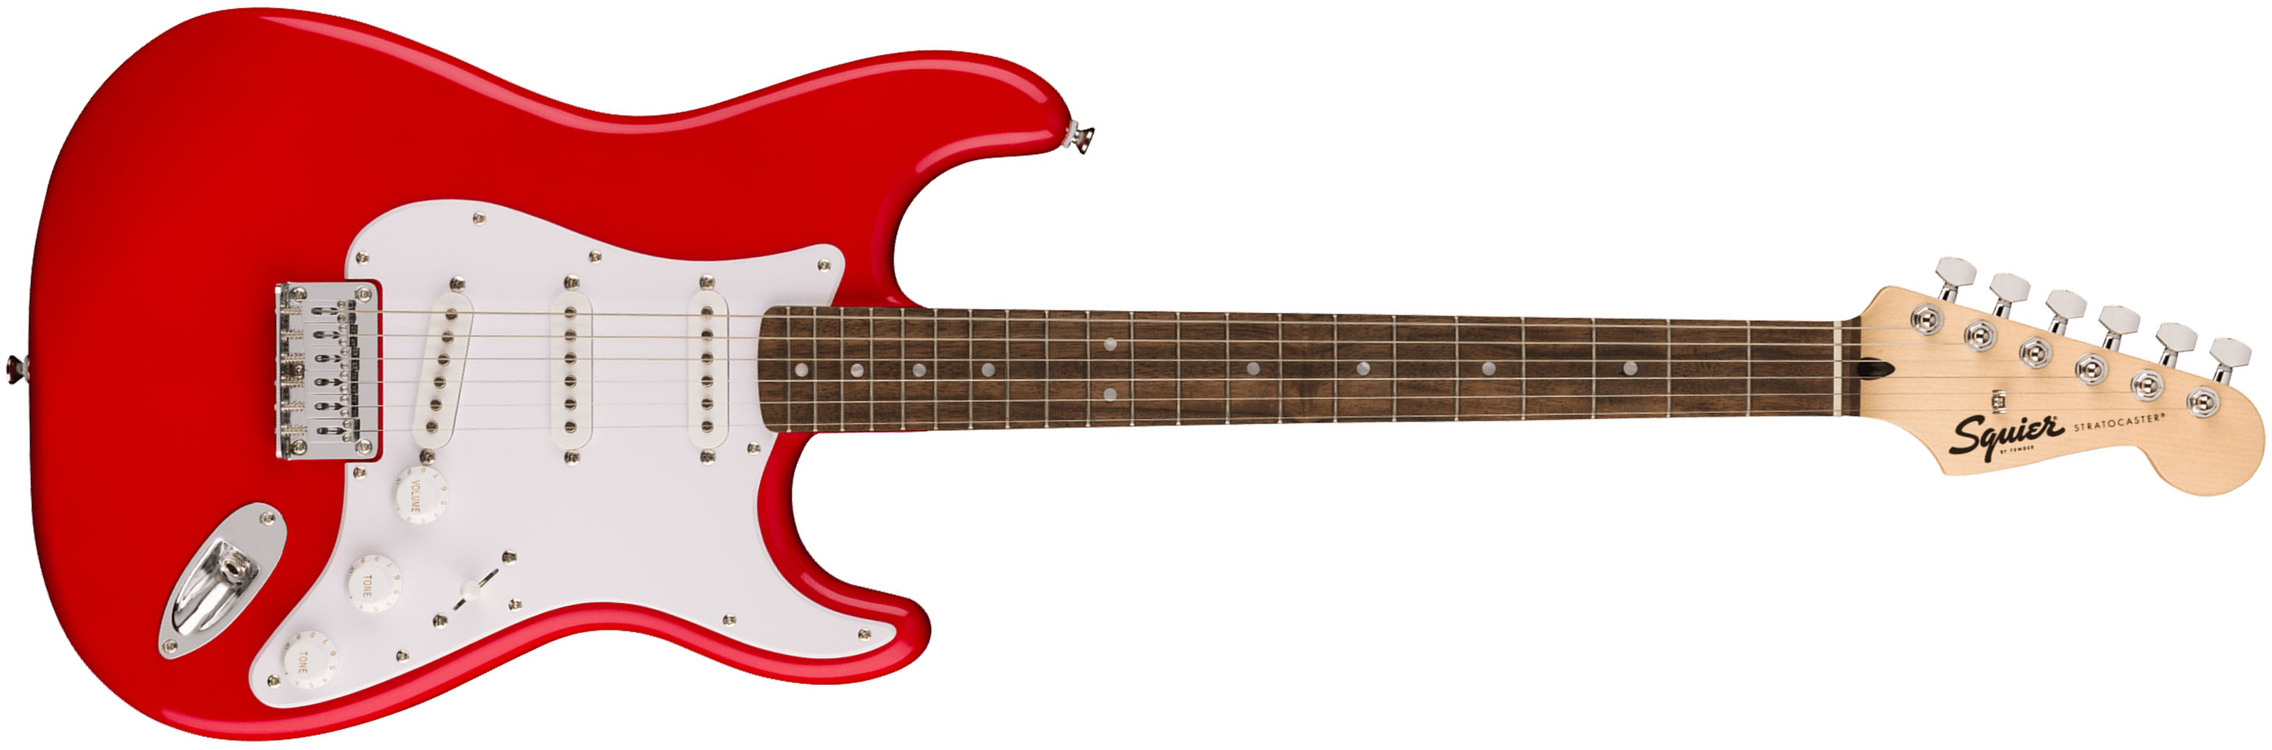 Squier Strat Sonic Hardtail 3s Ht Lau - Torino Red - Str shape electric guitar - Main picture